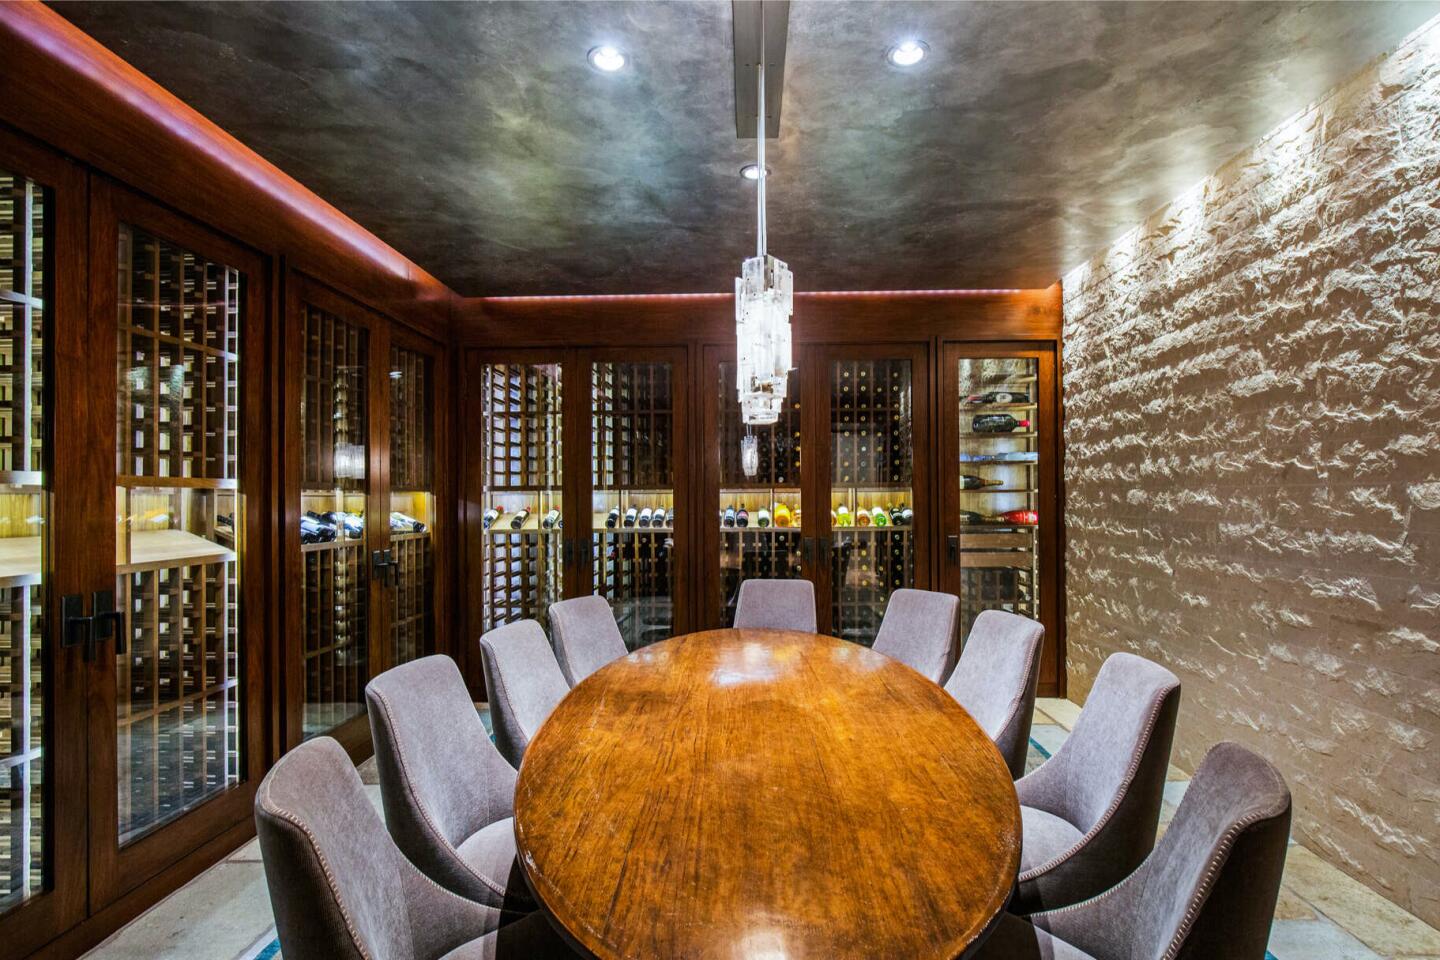 The wine cellar with a table surrounding by chairs.